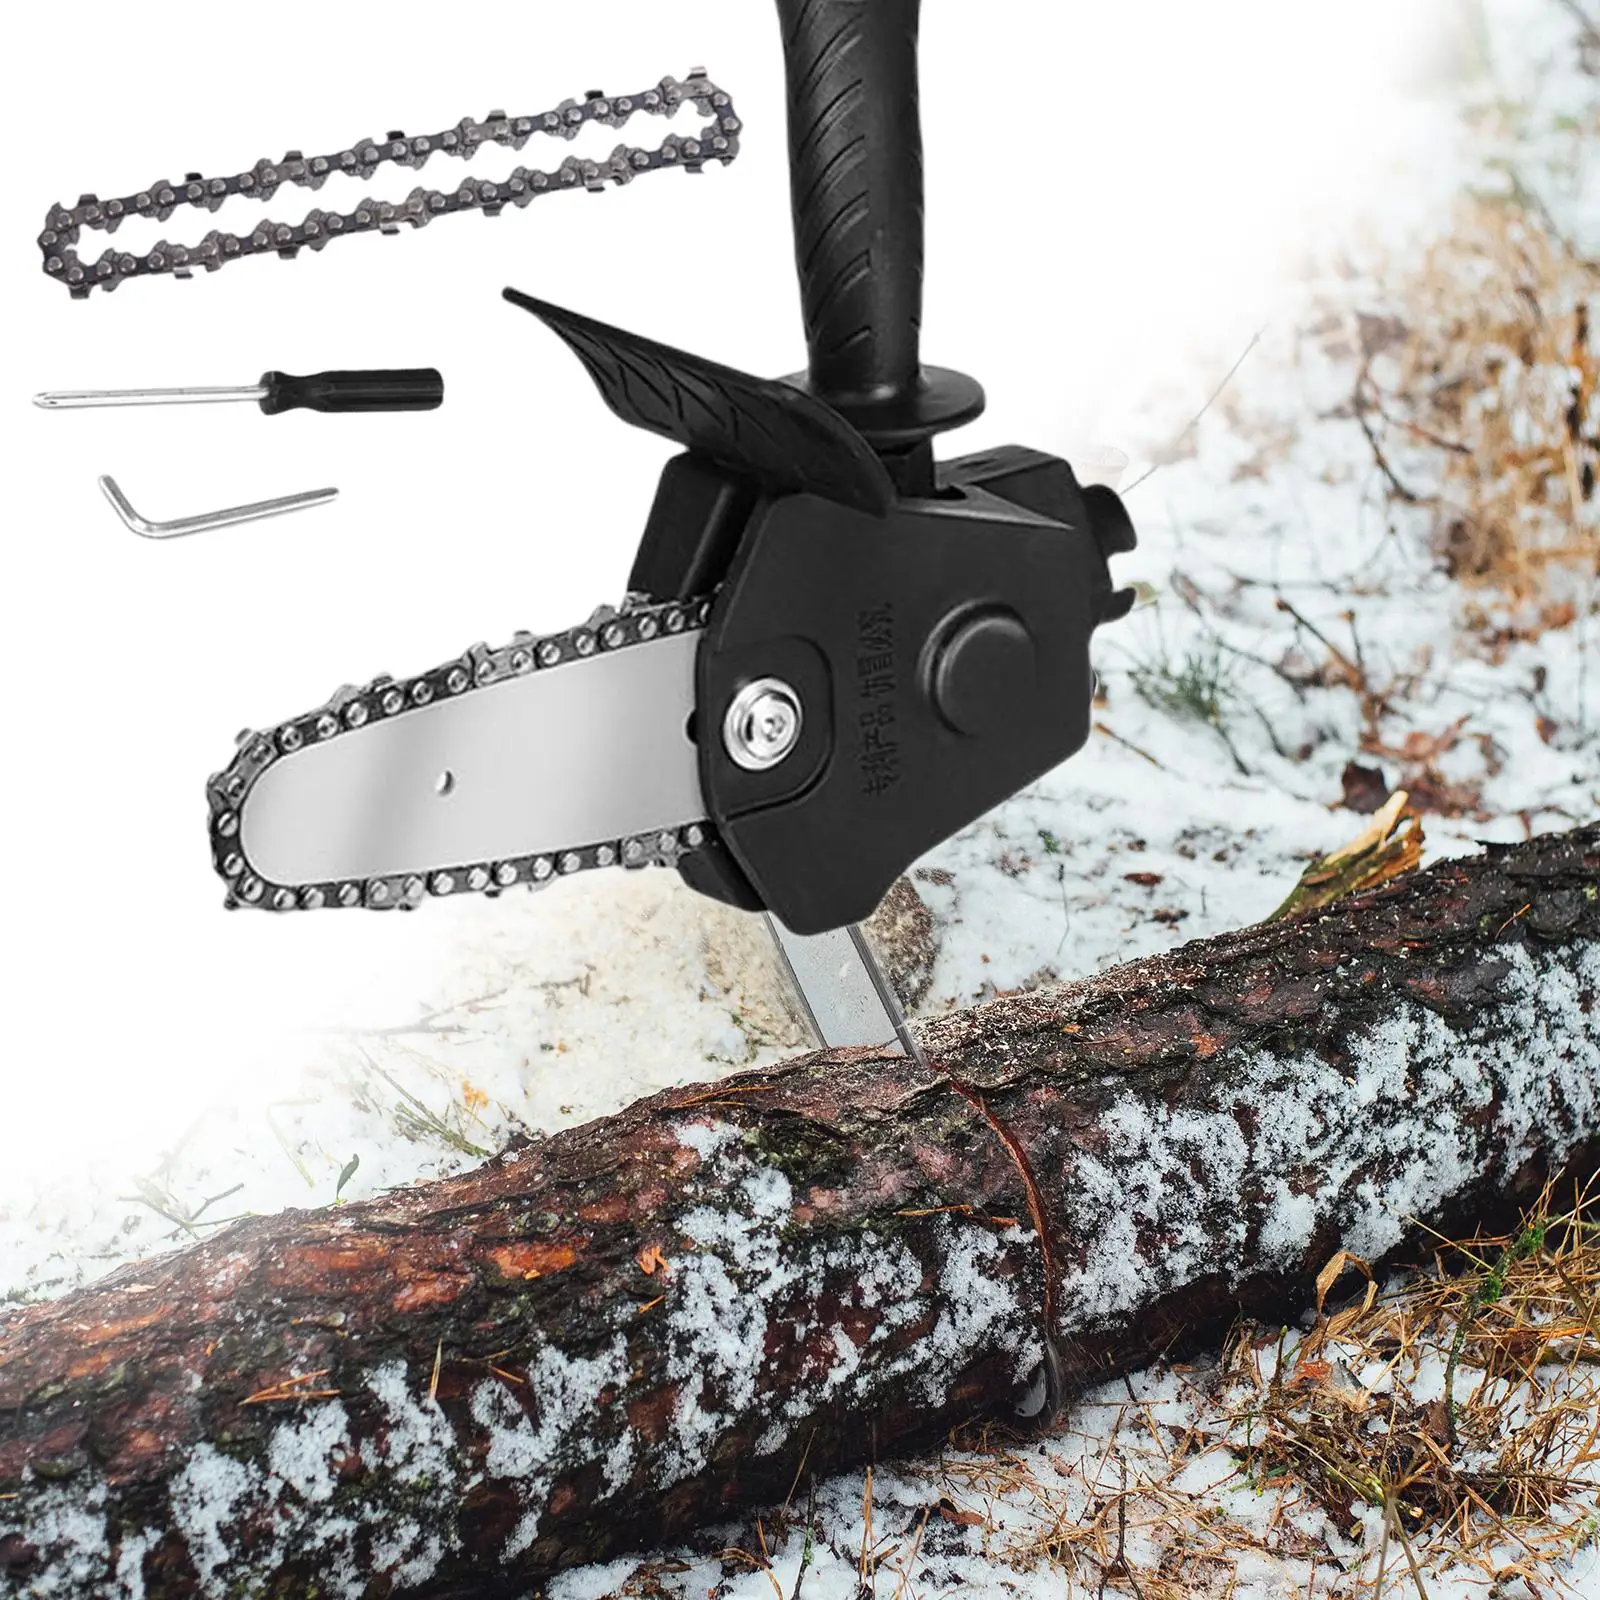 Mini Chainsaw Brackets with Spare Chain Electric Drill into Chain Saw for Garden Farming